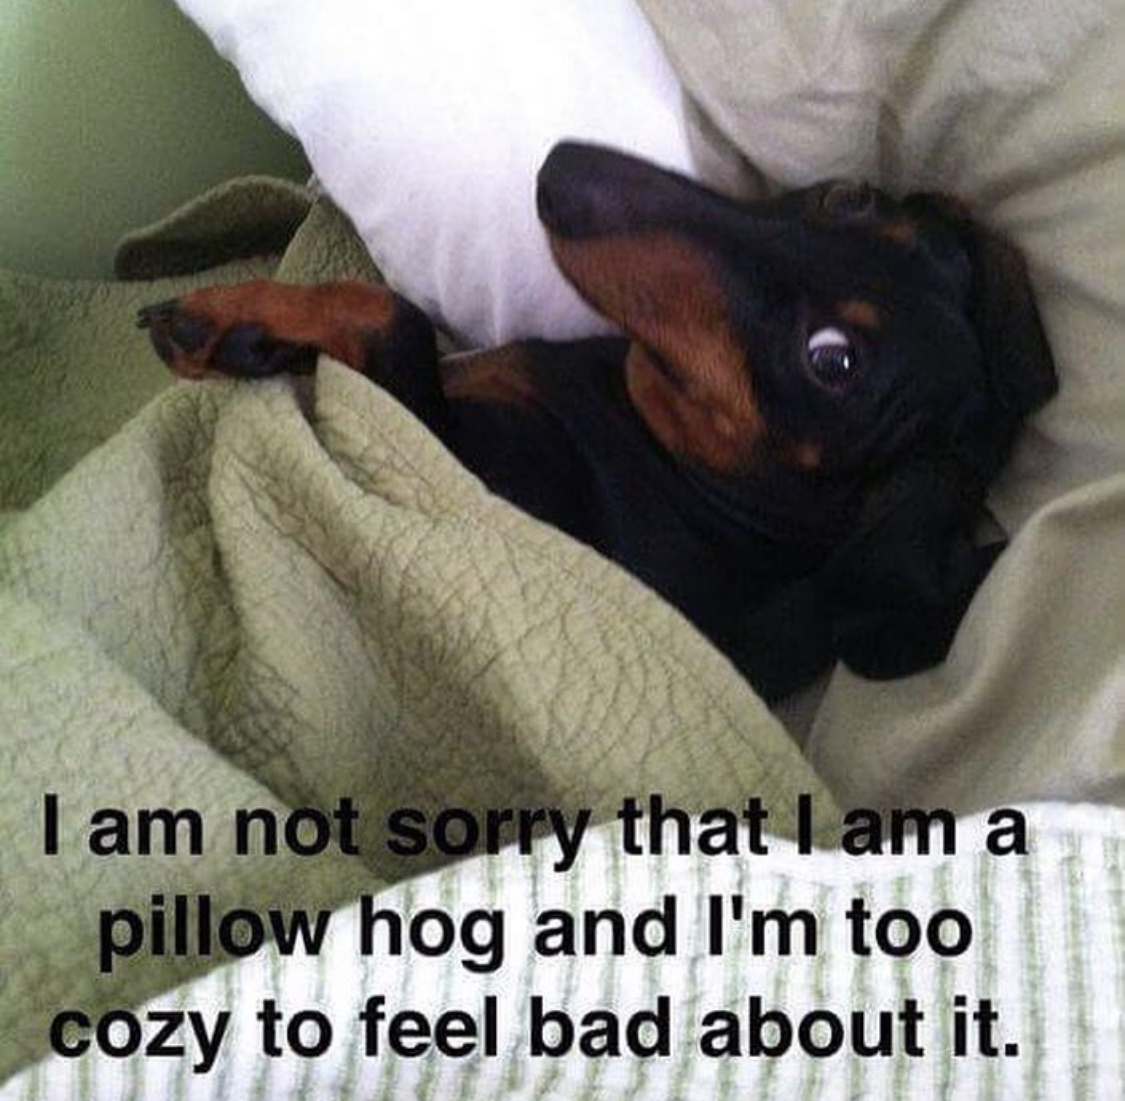 photo of a Dachshund snuggled in bed with text - I am not sorry that I am a pillow hog and I'm too cozy to feel bad about it.